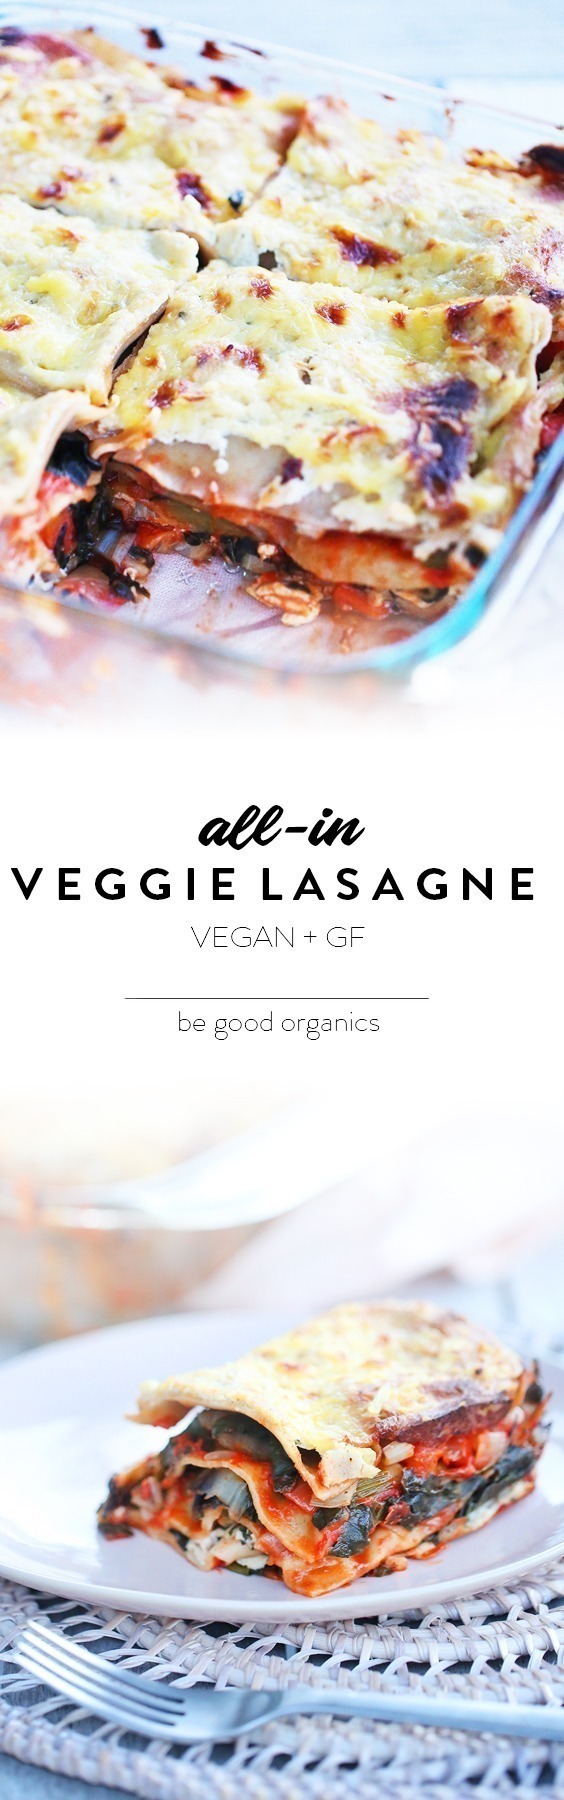 Not sure what to cook for dinner tonight? Try this delicious fully vegan lasagne! Perfect for using up whatever vege you’ve got in the fridge right now. Vegan, gluten free + dairy free.